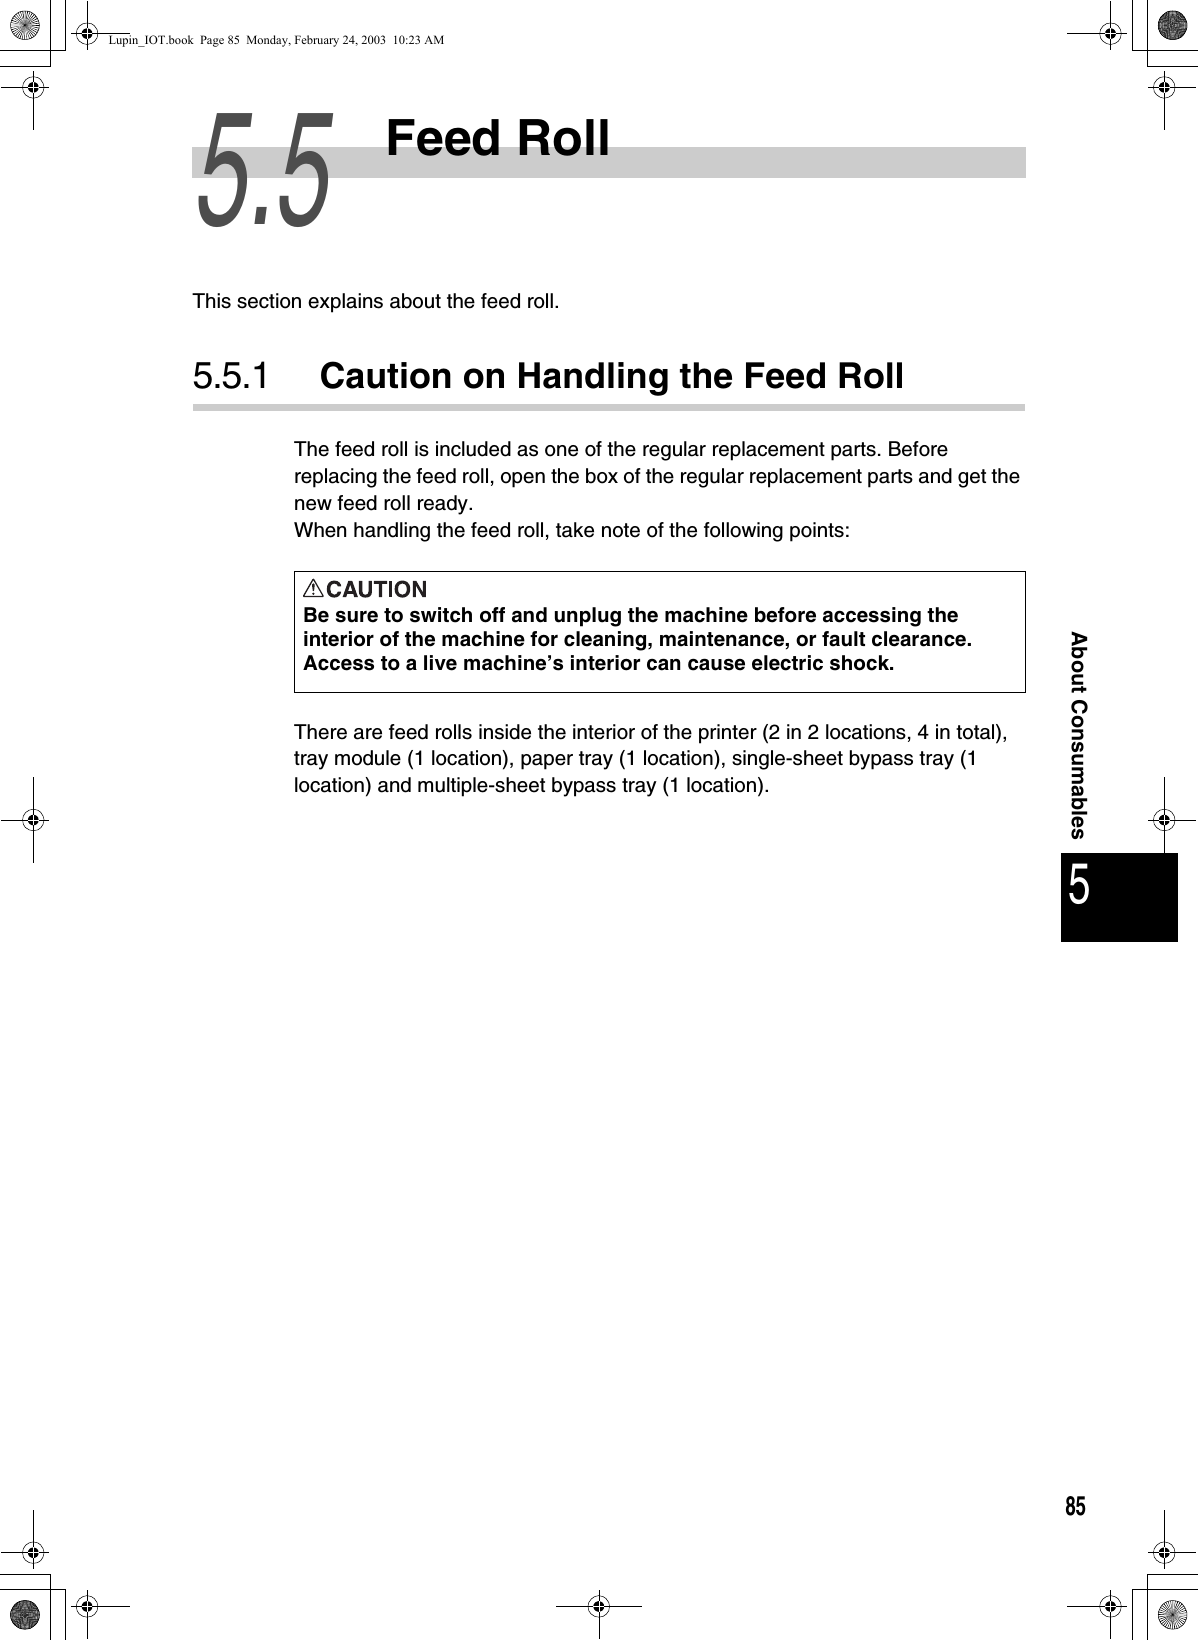 855About Consumables5.5Feed RollThis section explains about the feed roll. 5.5.1 Caution on Handling the Feed RollThe feed roll is included as one of the regular replacement parts. Before replacing the feed roll, open the box of the regular replacement parts and get the new feed roll ready. When handling the feed roll, take note of the following points:There are feed rolls inside the interior of the printer (2 in 2 locations, 4 in total), tray module (1 location), paper tray (1 location), single-sheet bypass tray (1 location) and multiple-sheet bypass tray (1 location). Be sure to switch off and unplug the machine before accessing the interior of the machine for cleaning, maintenance, or fault clearance.  Access to a live machine’s interior can cause electric shock.Lupin_IOT.book  Page 85  Monday, February 24, 2003  10:23 AM